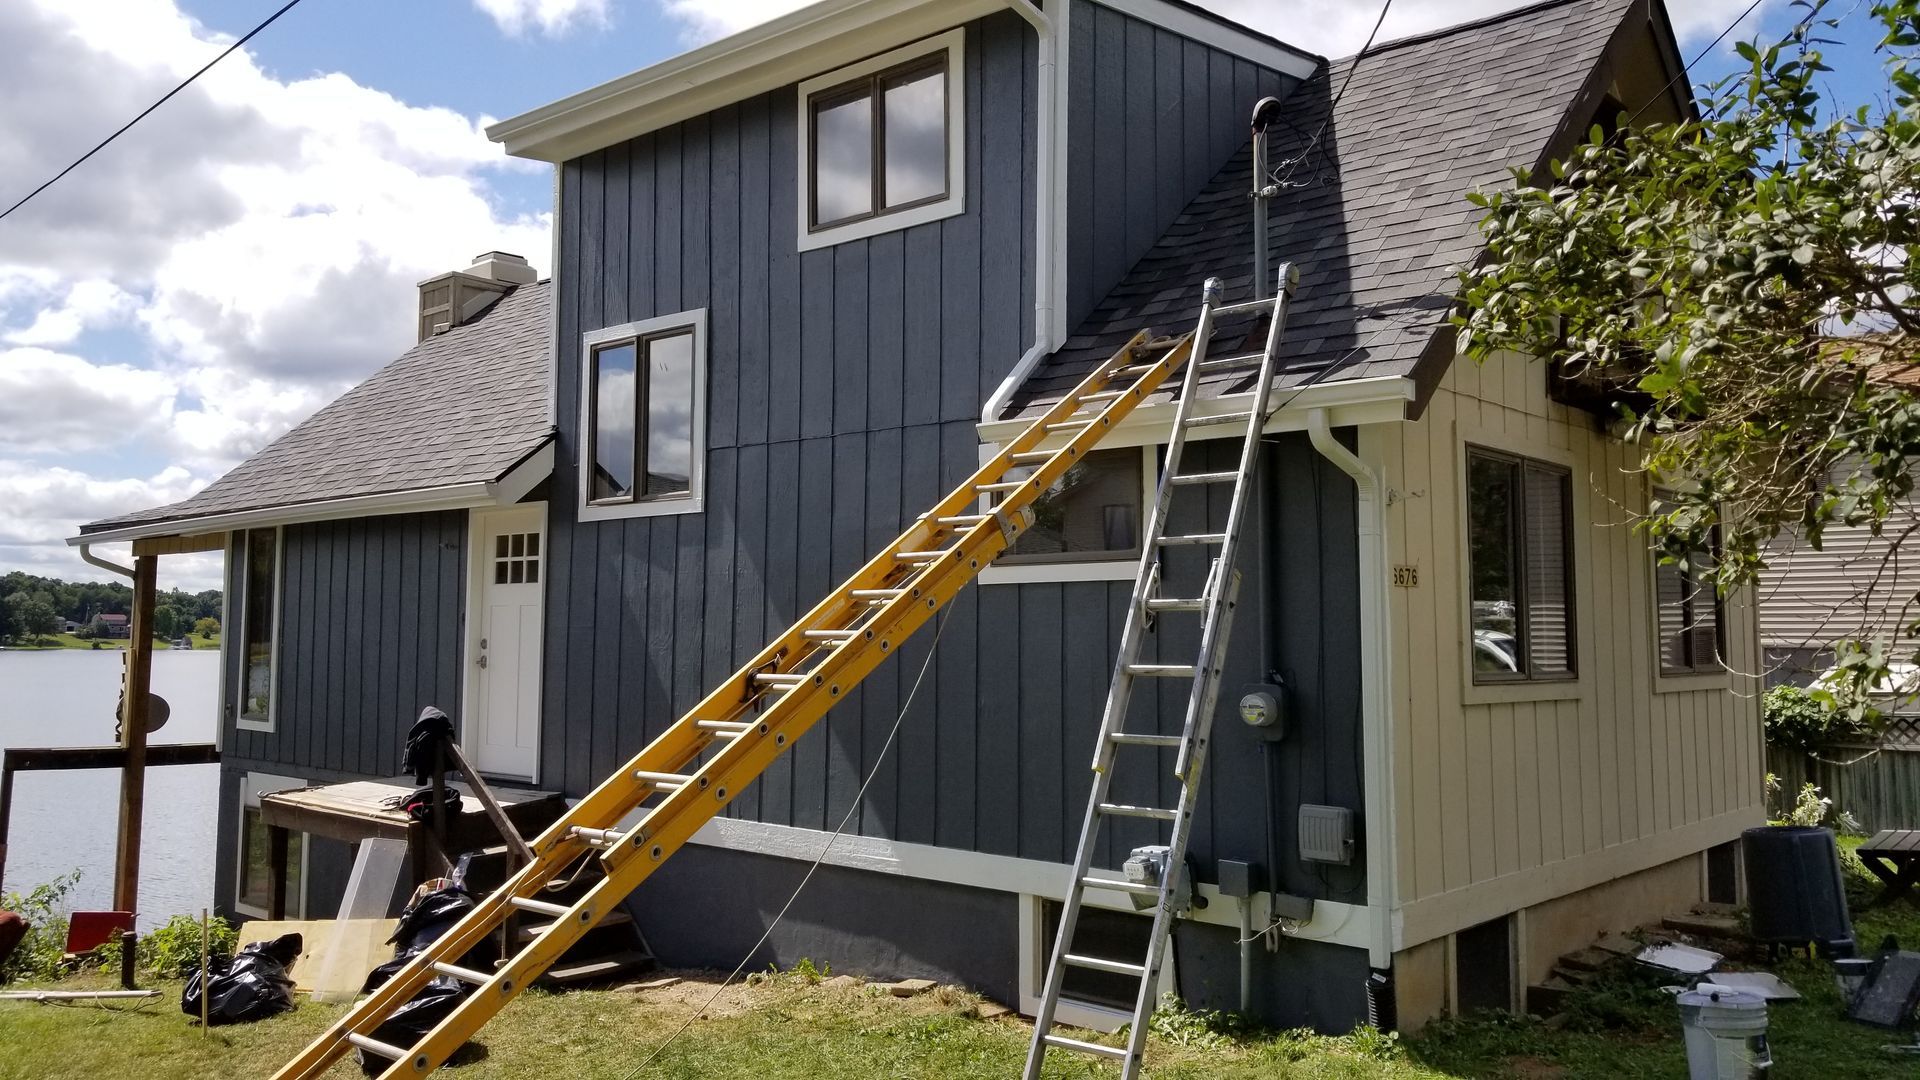 A ladder is leaning against the side of a house.